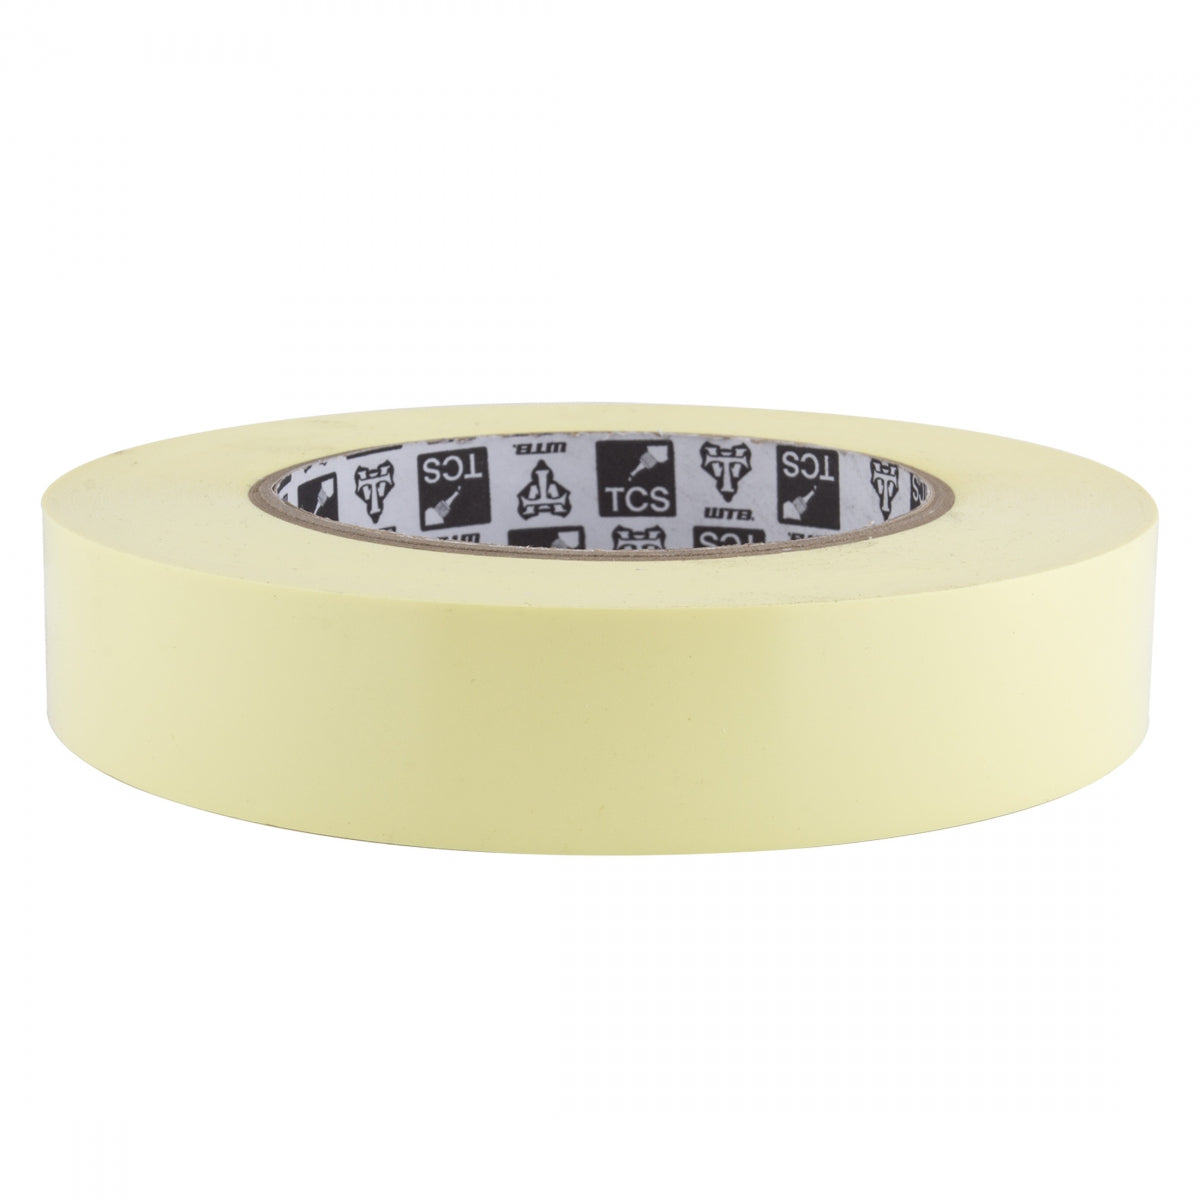 24mm Adhesive Tape for Packaging (1 inch)